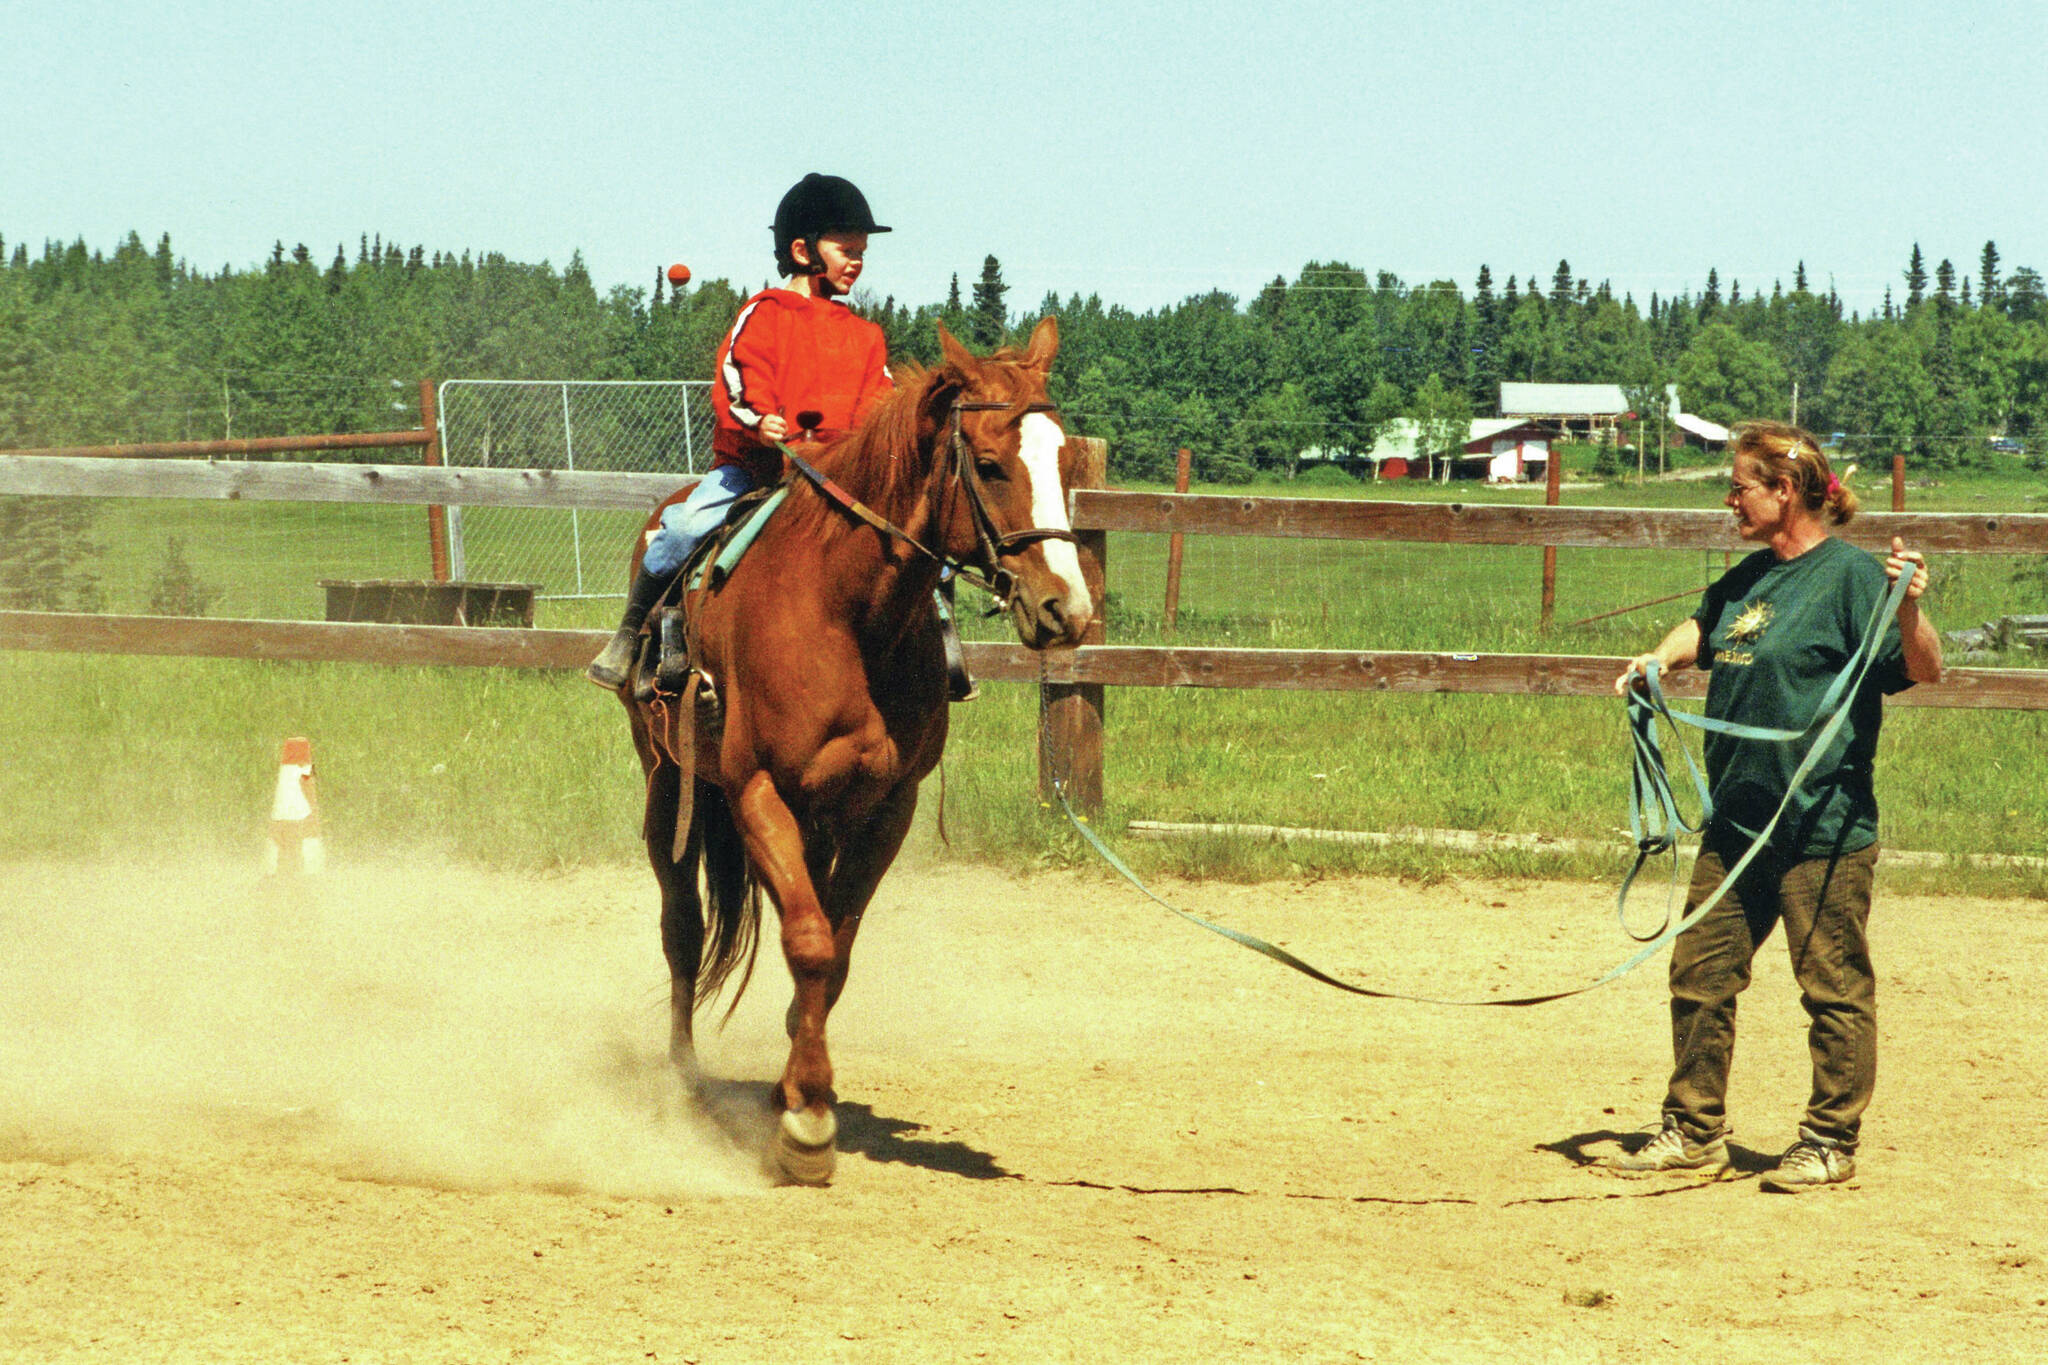 For many years, Abby (Lancashire) Ala (standing) gave horseback riding lessons at her home, the site of her longtime business, Ridgeway Farms. (Clark Fair photo from 2001)